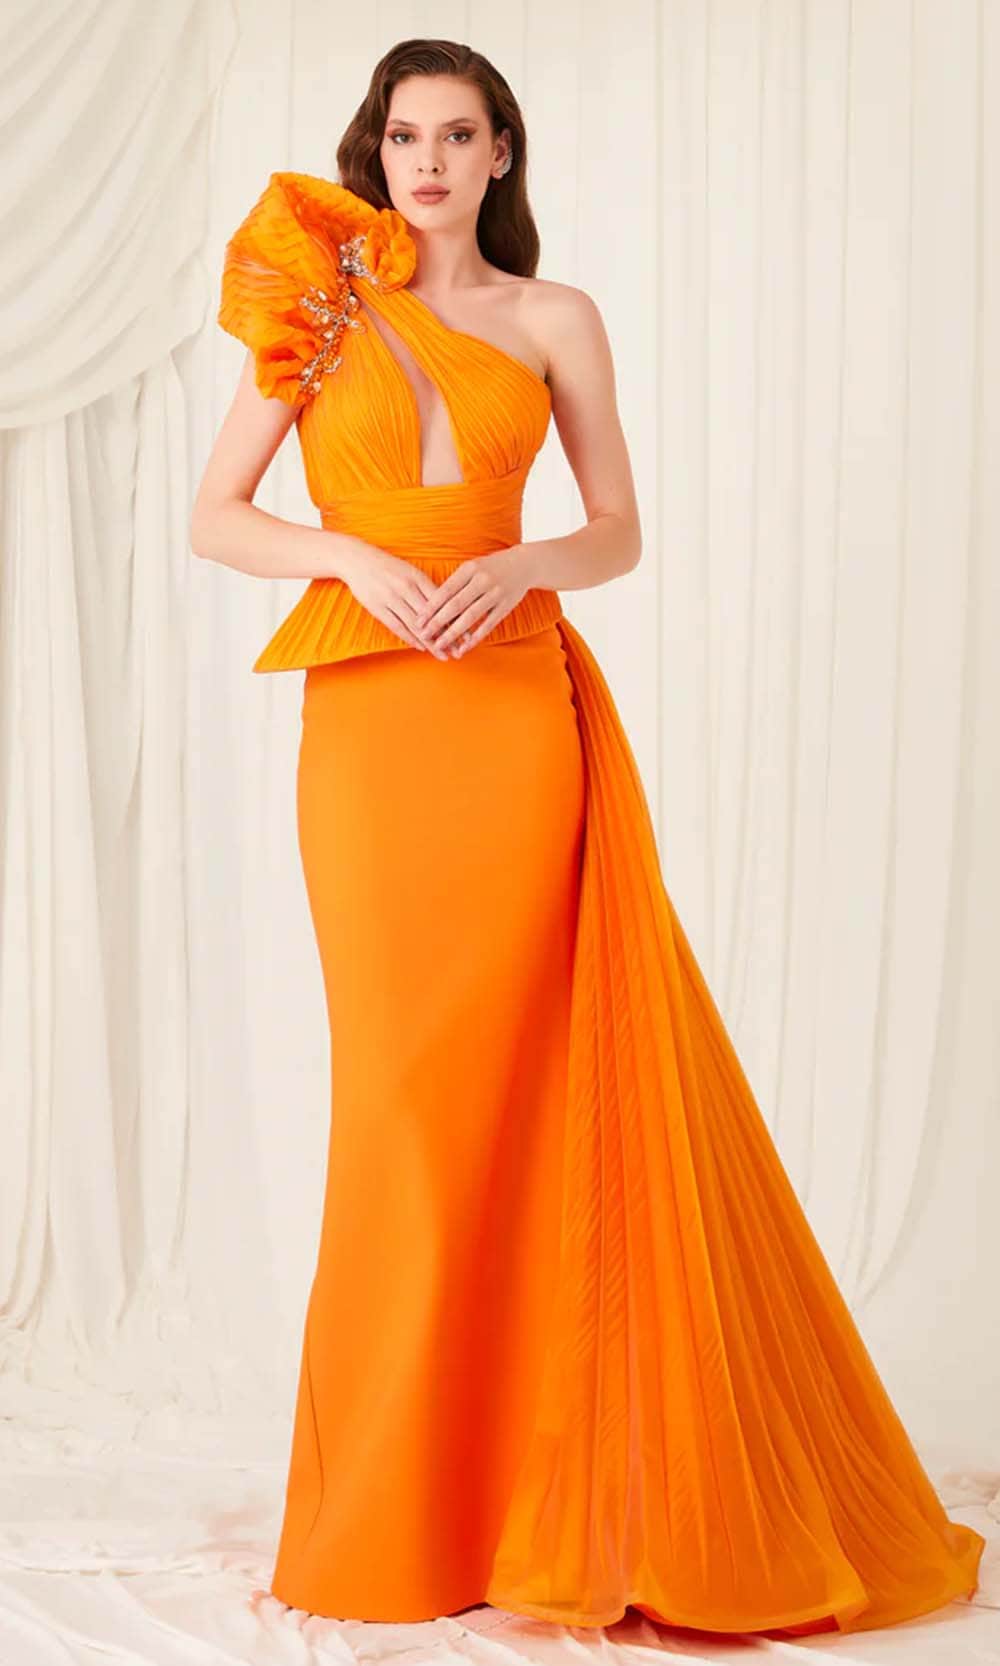 Image of MNM Couture 2799A - Asymmetric Neck Peplum Evening Gown